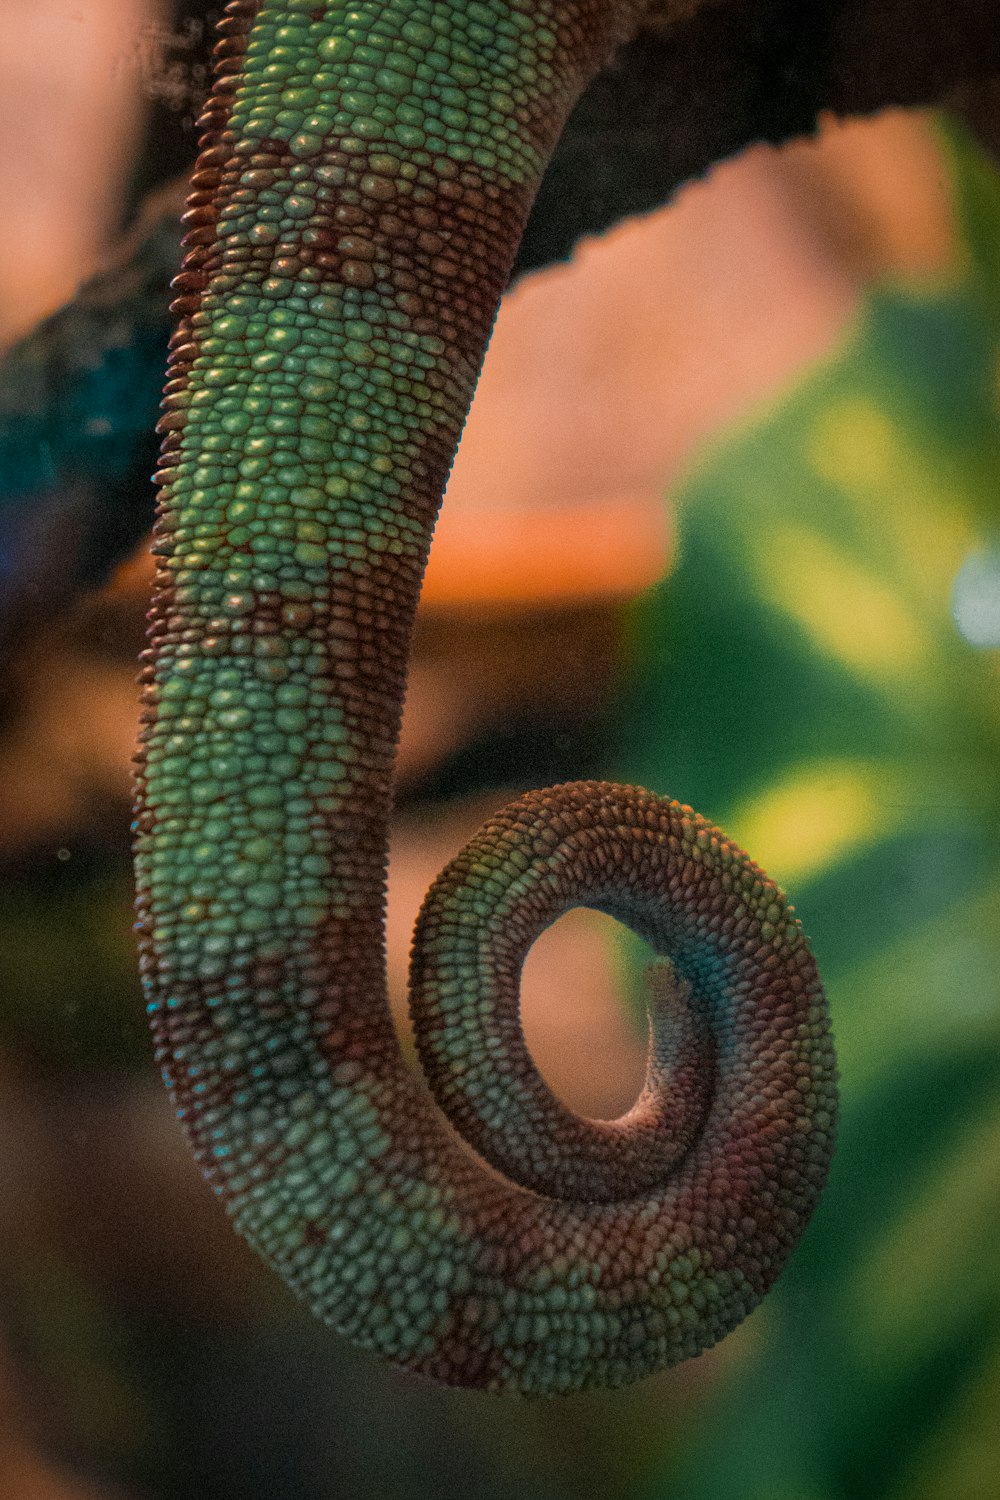 a close up of a green and brown lizard's tail